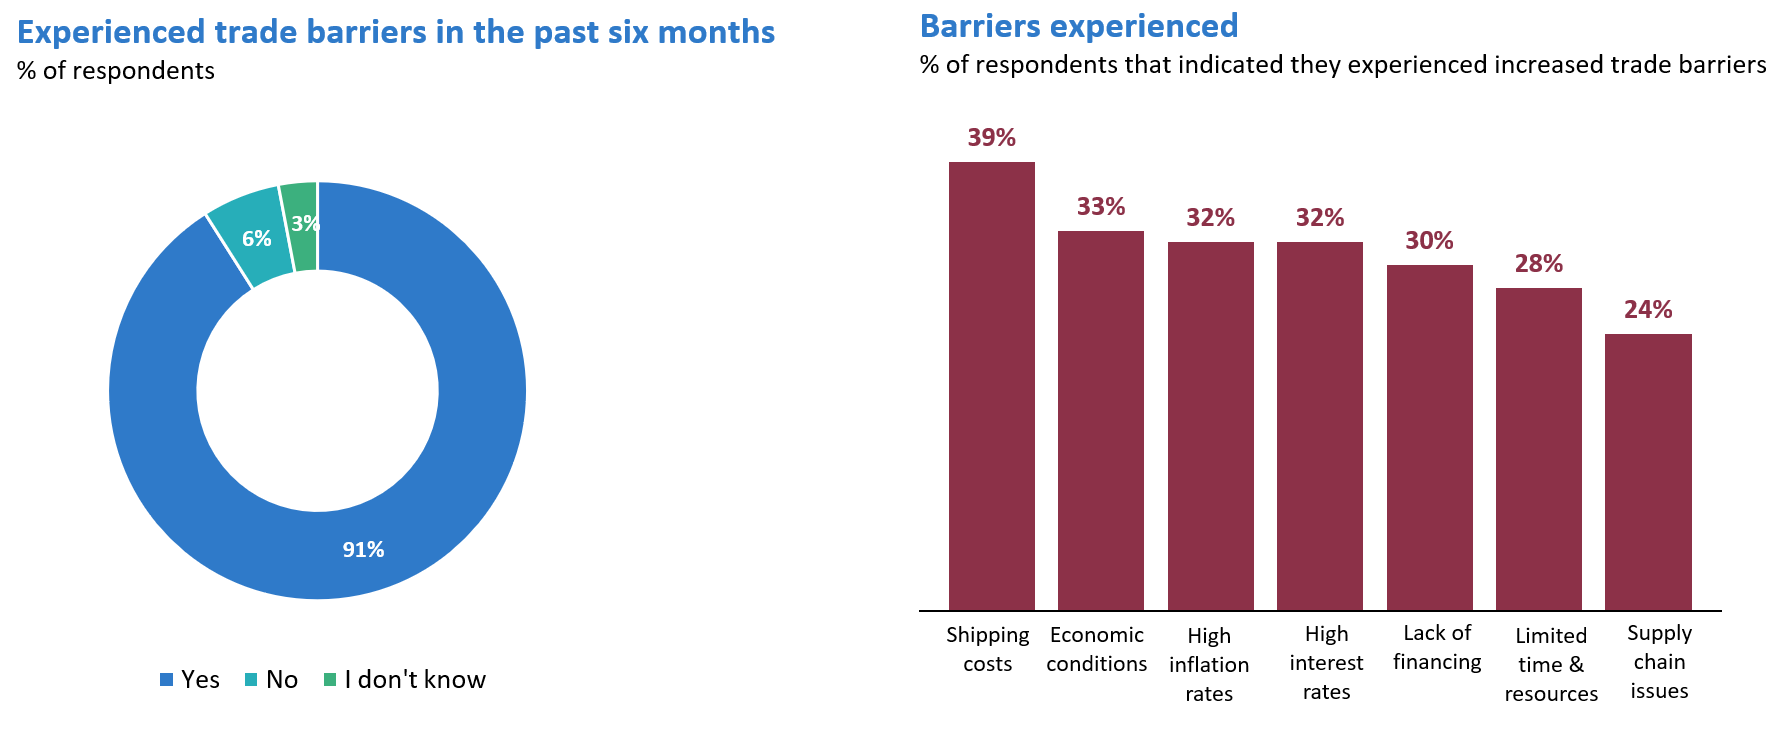 Most survey respondents facing trade barrier issues (increased shipping costs, bleak economic conditions)